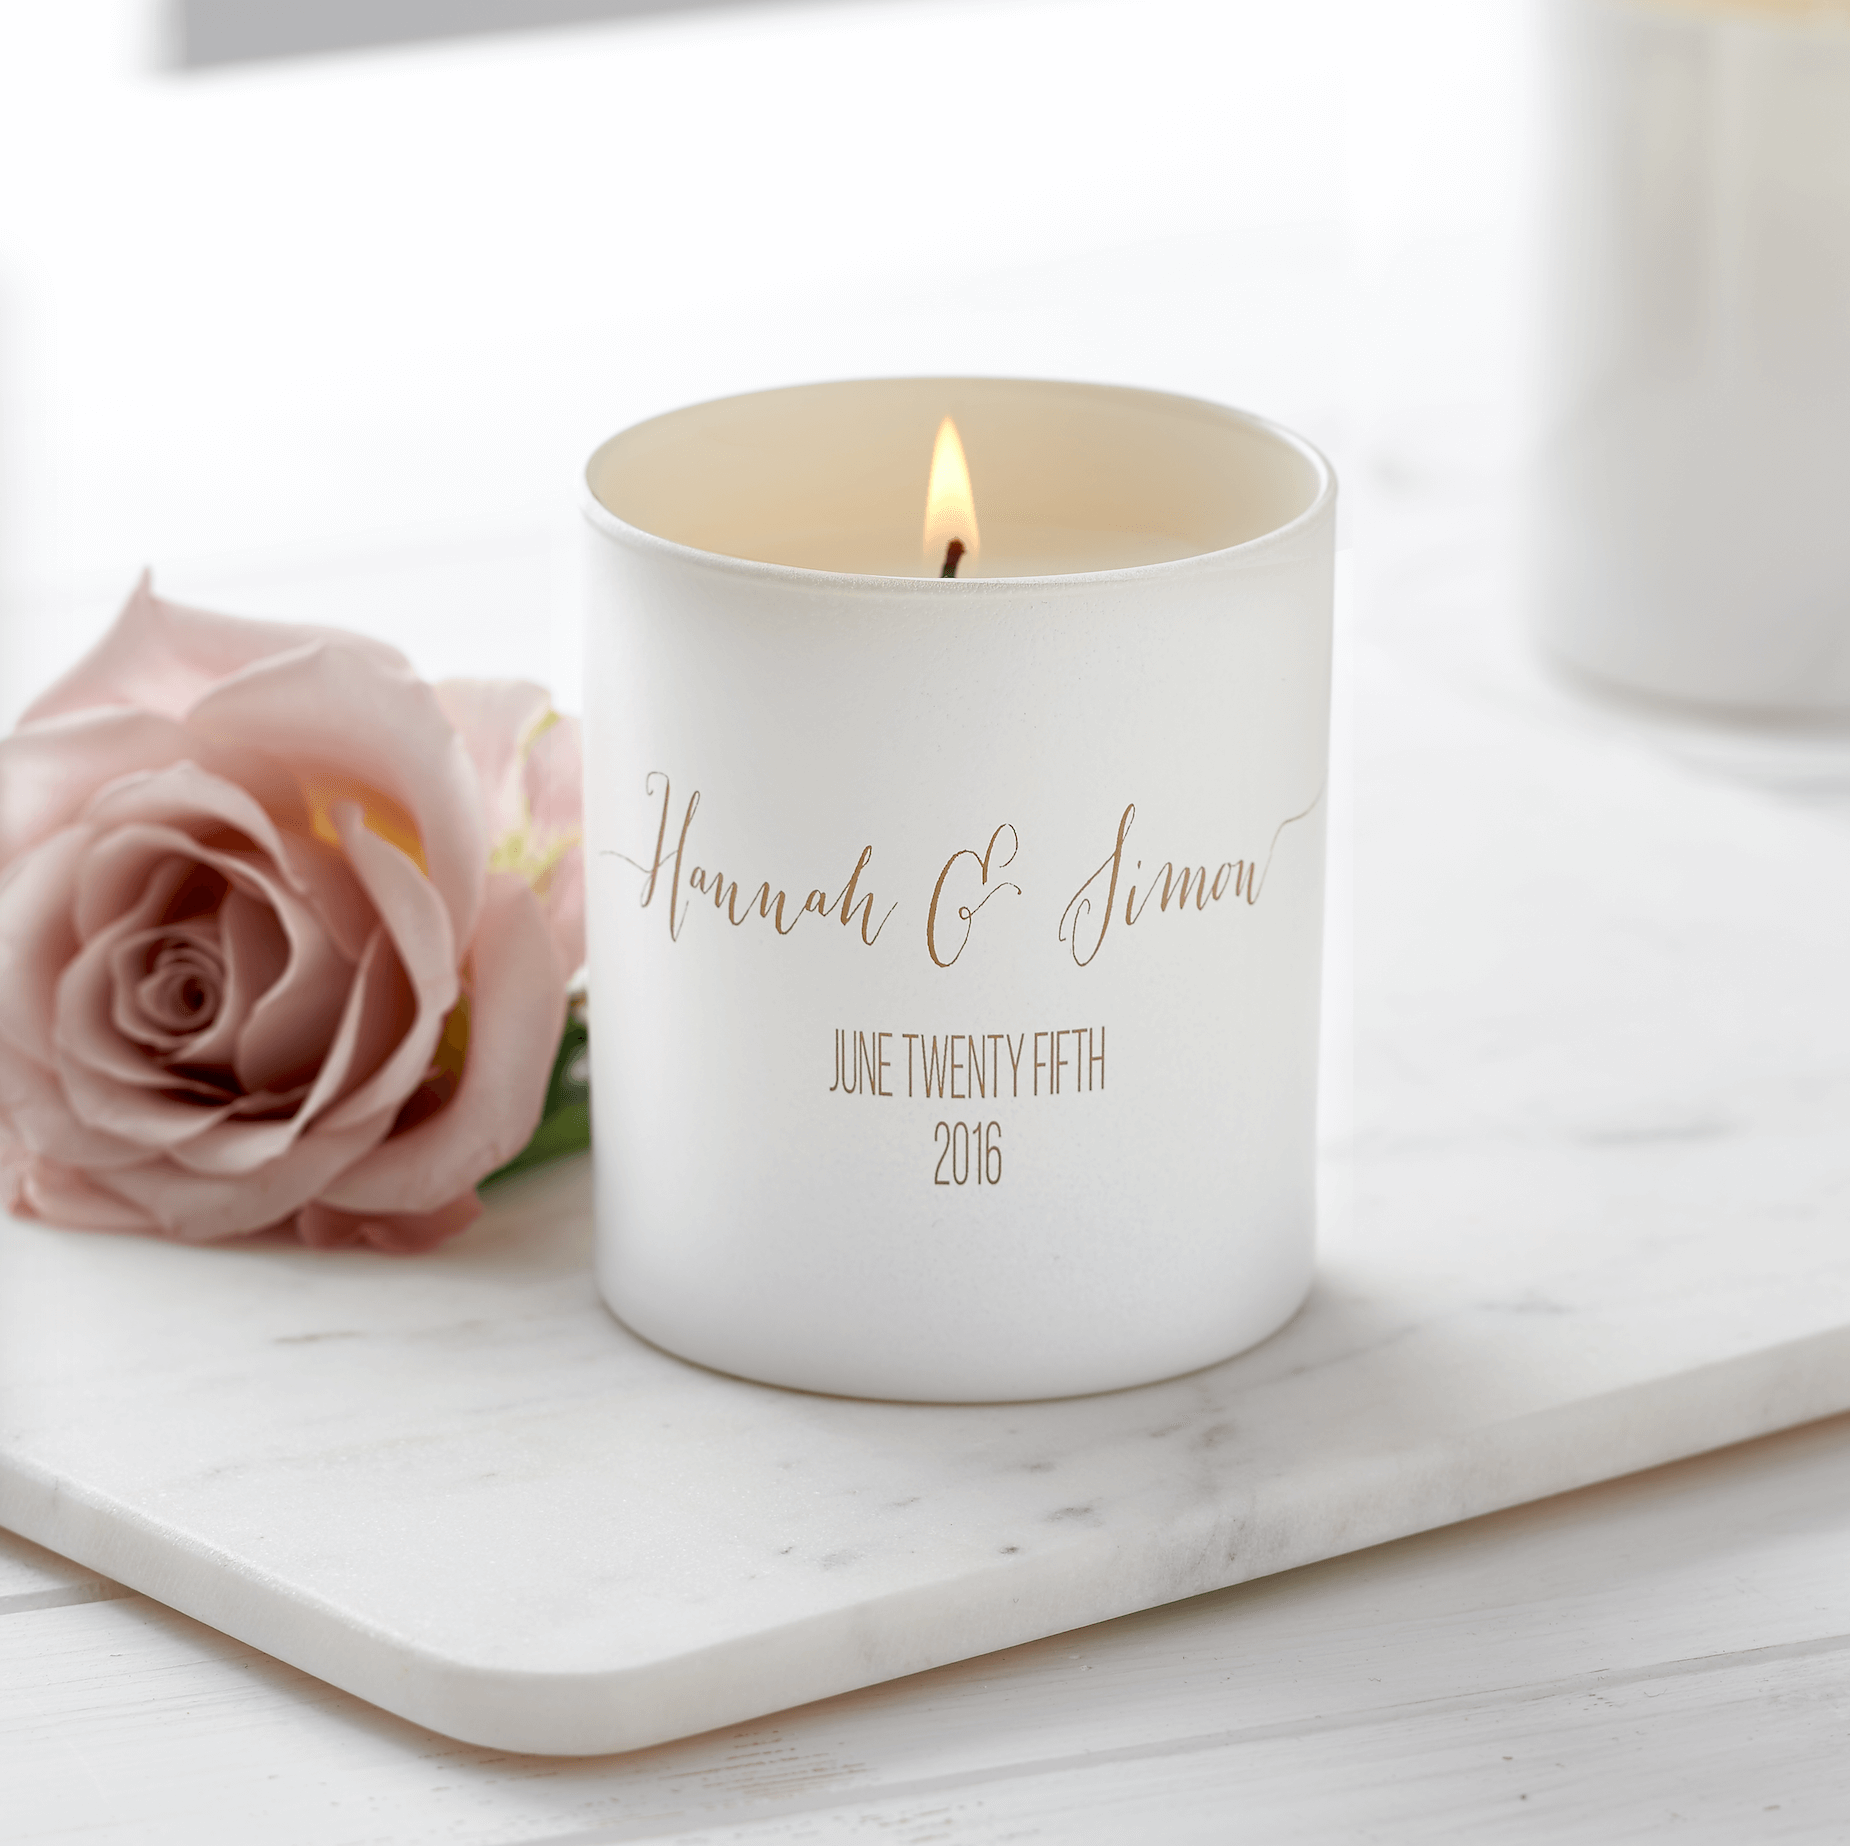 bridebook.co.uk Lily Belle London hand poured candle